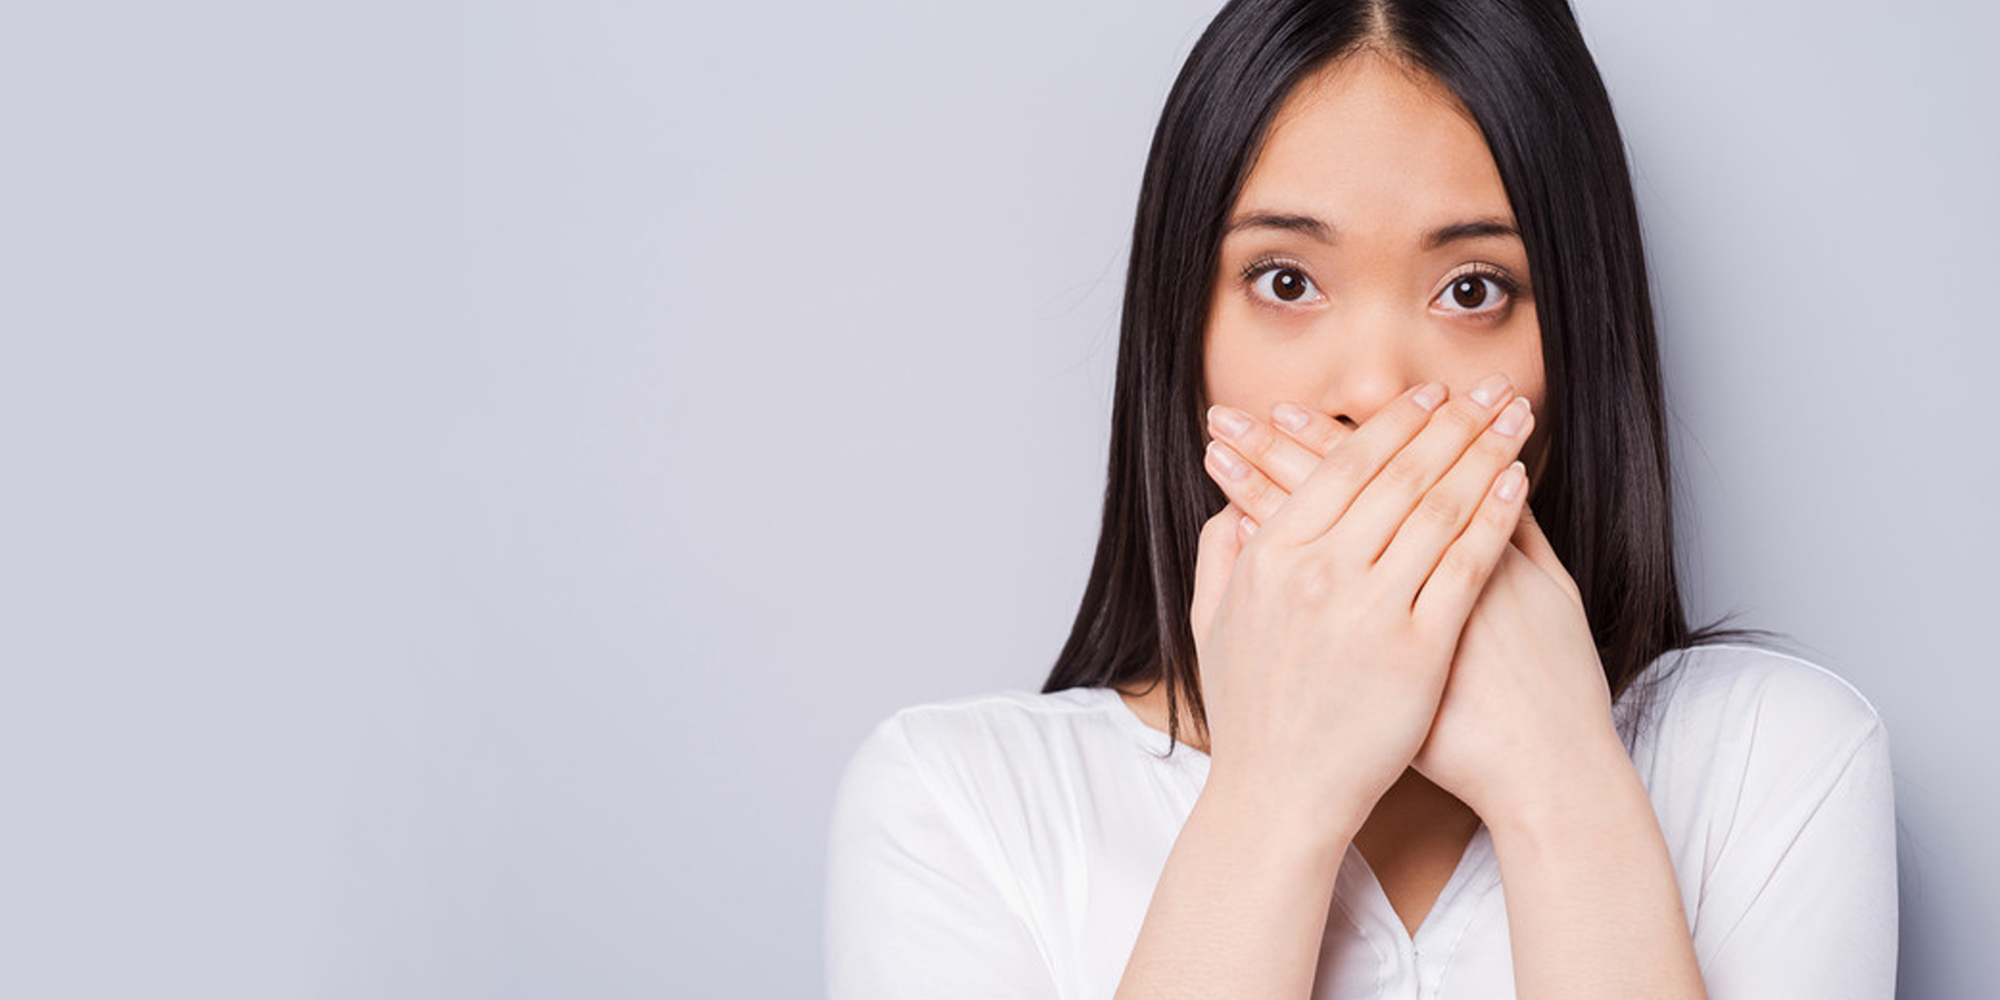 Oman wellness: Bad breath could be a thing of the past